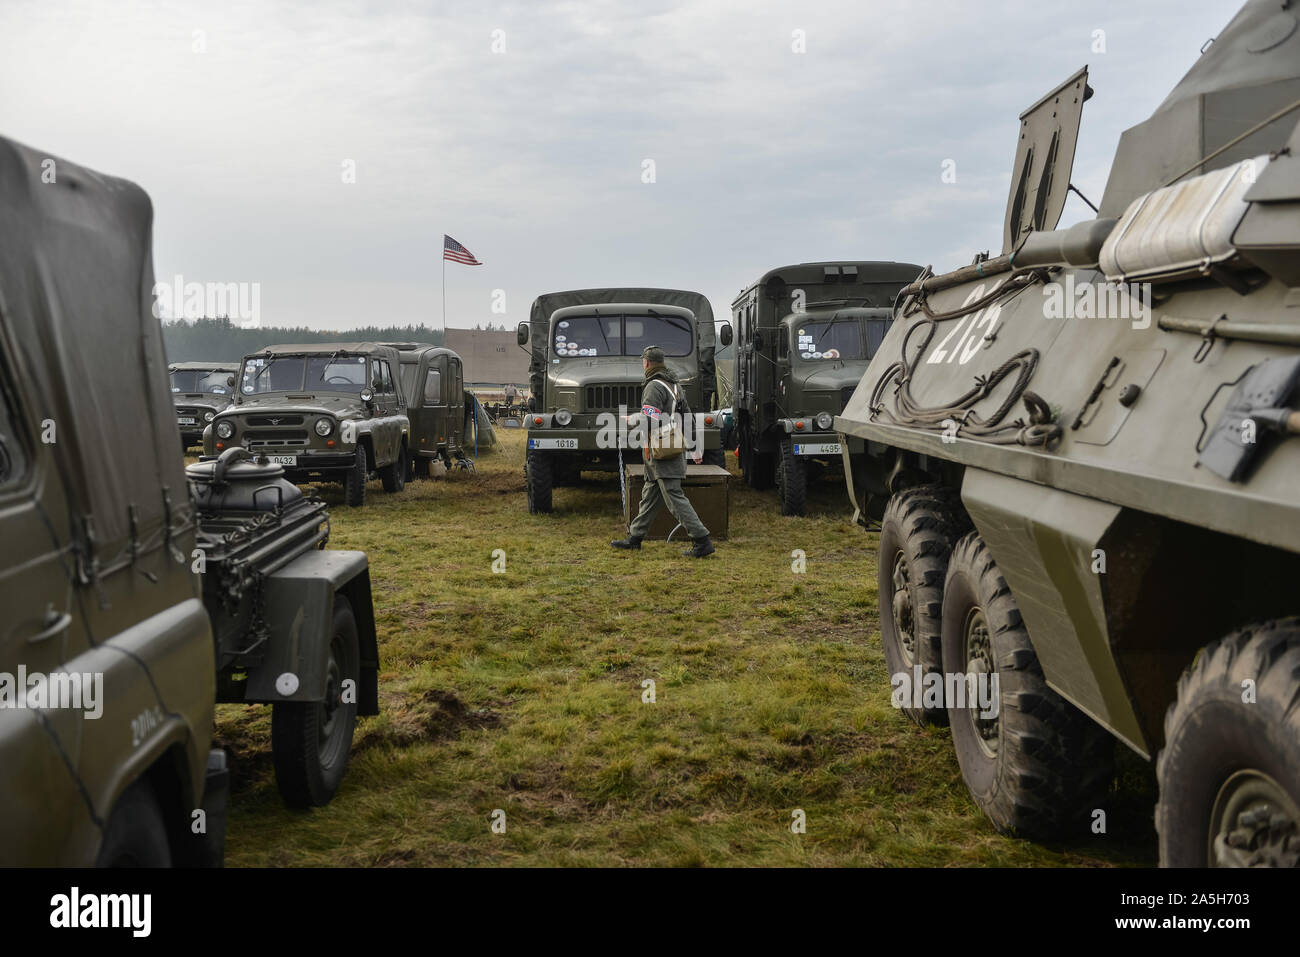 Ralsko, Czech Republic. 19th Oct, 2019. Event marking 30 years of freedom, with concerts, air shows, historical military vehicles, war films, exhibitions and discussion was held in Ralsko, Czech Republic, on October 19, 2019. Credit: Vit Cerny/CTK Photo/Alamy Live News Stock Photo